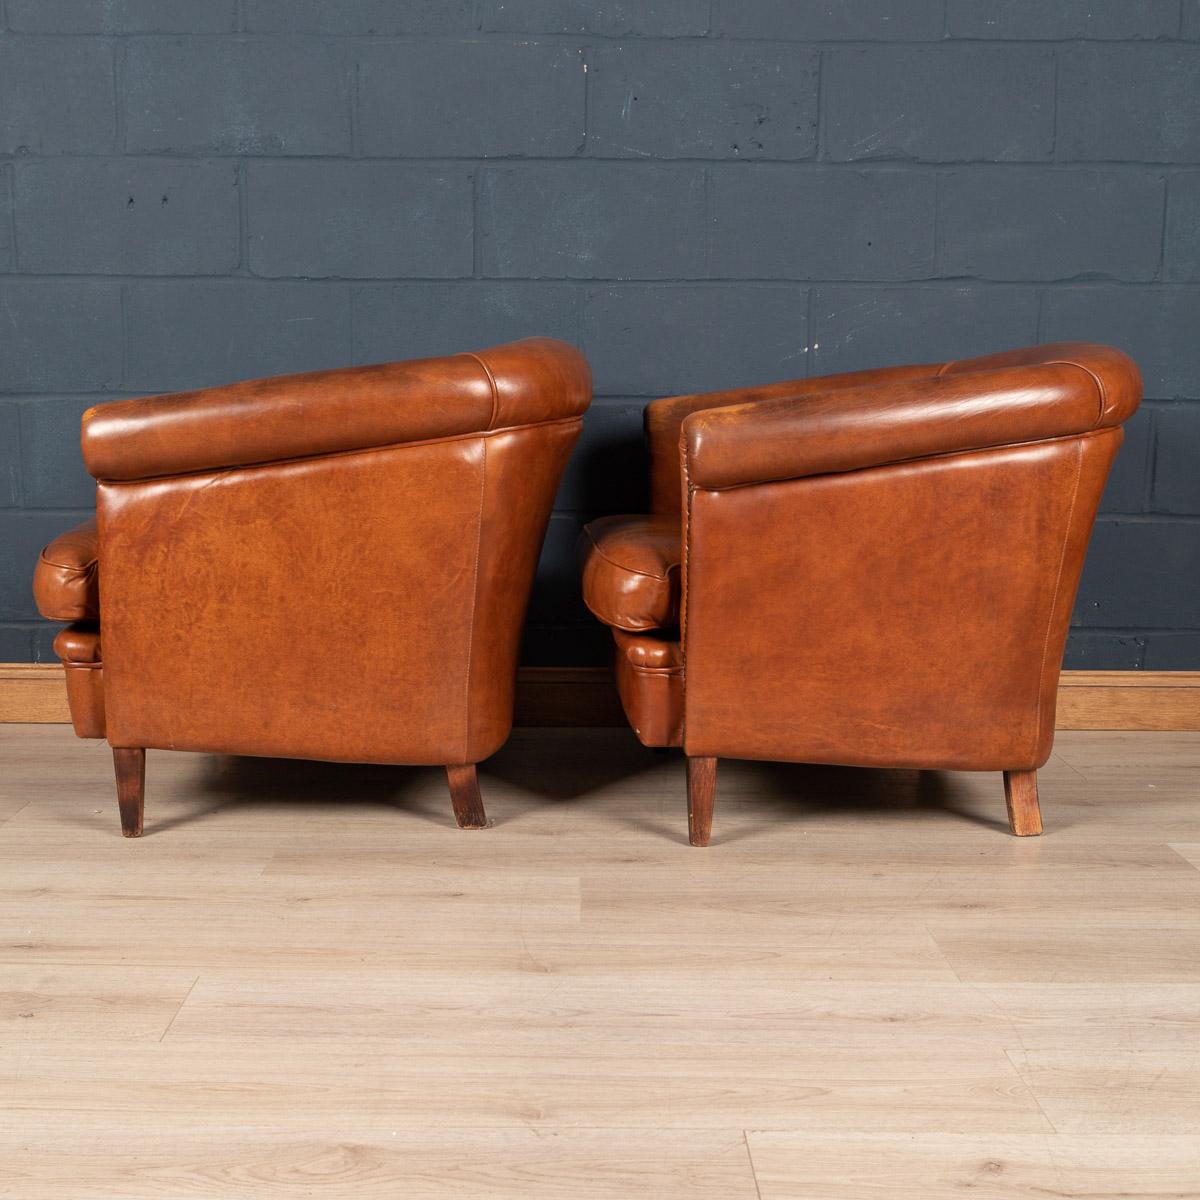 Showing superb patina and colour, this wonderful pair of tub chairs were hand upholstered sheepskin leather in Holland by the finest craftsmen. Fantastic look for any interior, both modern and traditional.

Condition

In good condition - wear